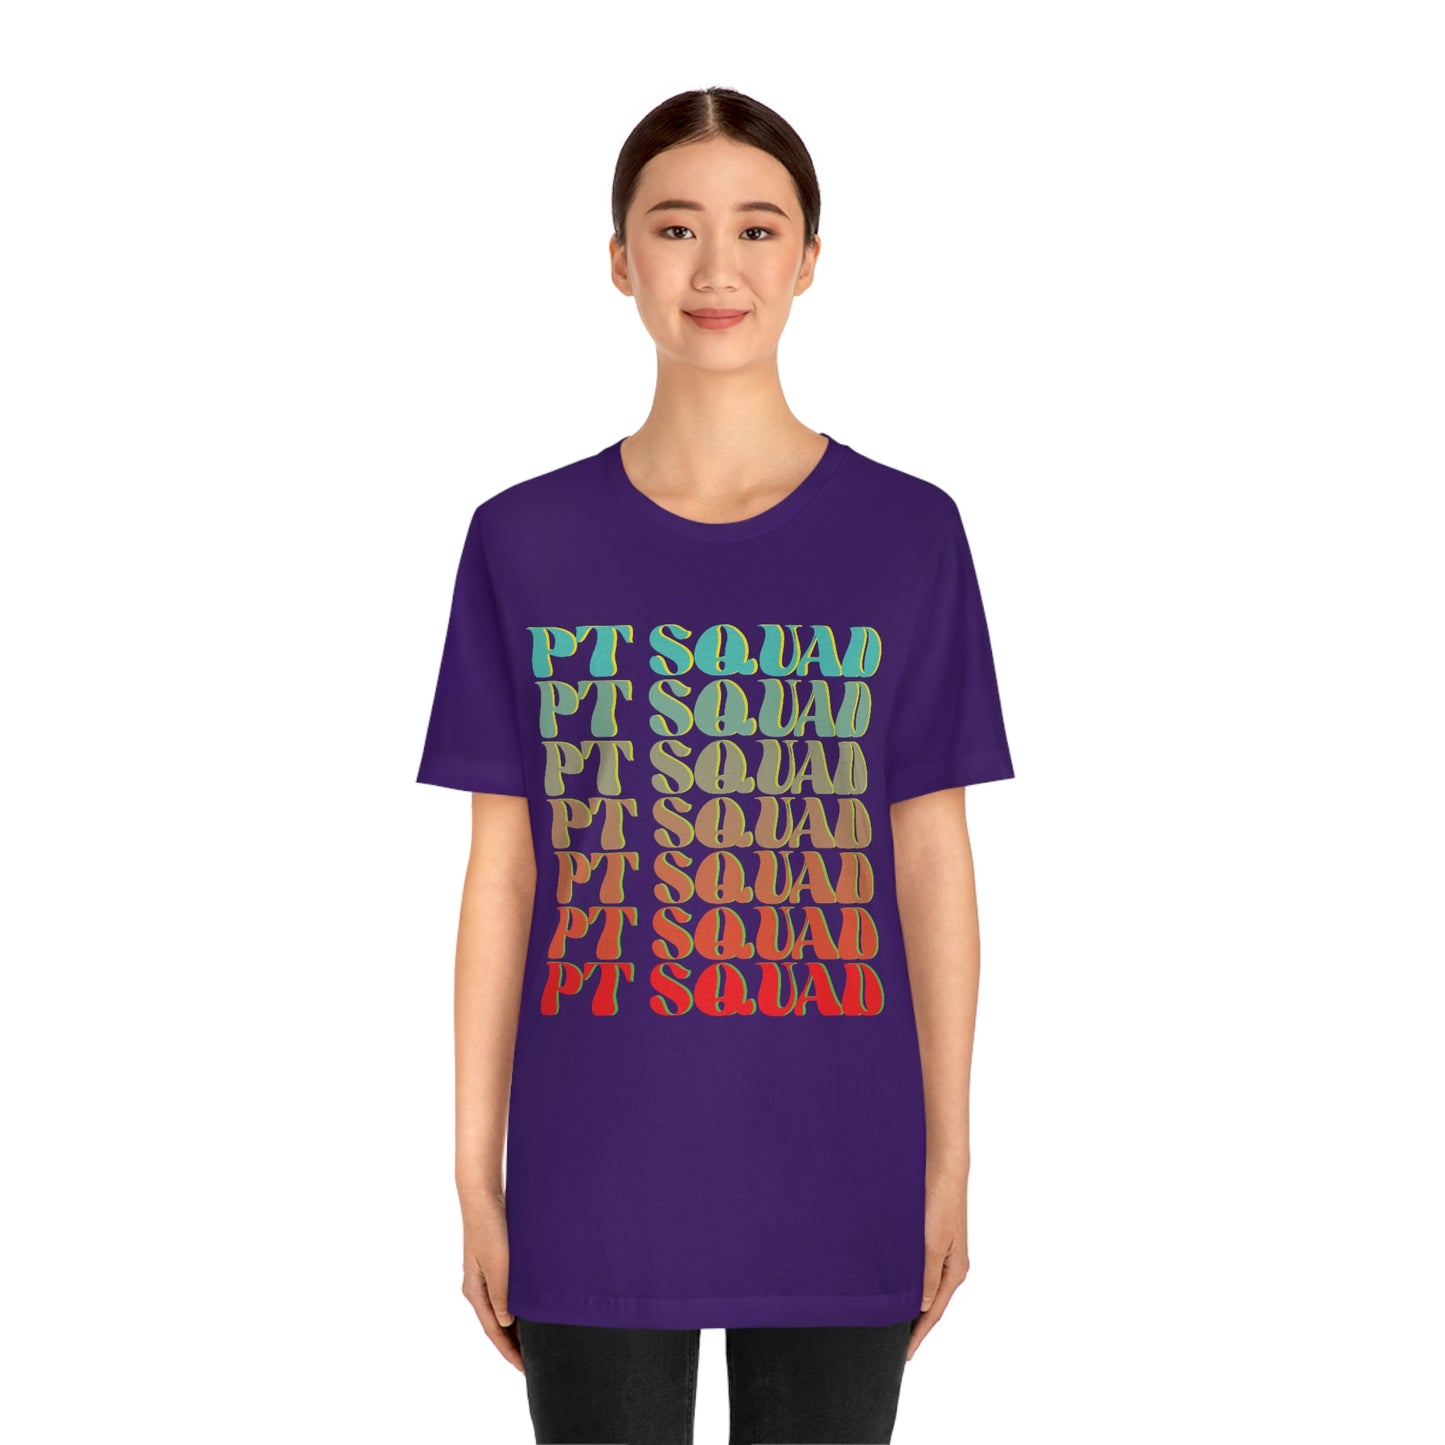 PT Squad Physycal Therapy Shirt